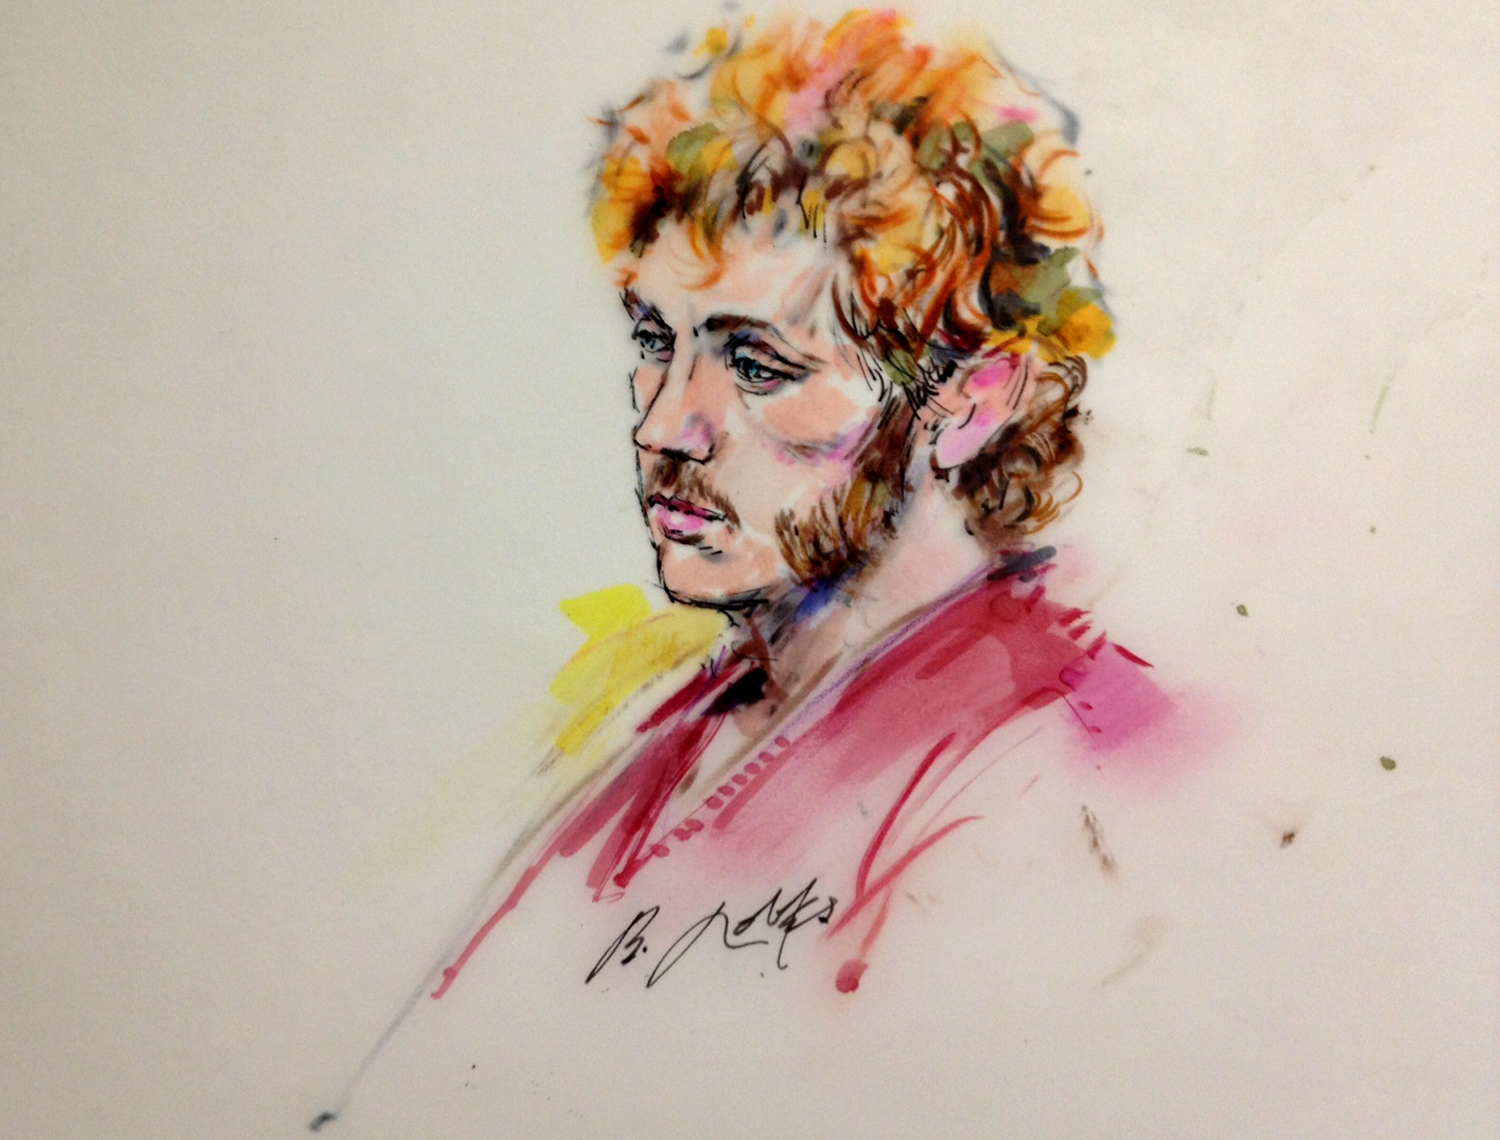 James Holmes,  convicted of 24 counts of murder and 140 counts of attempted murder for the 2012 Aurora shooting